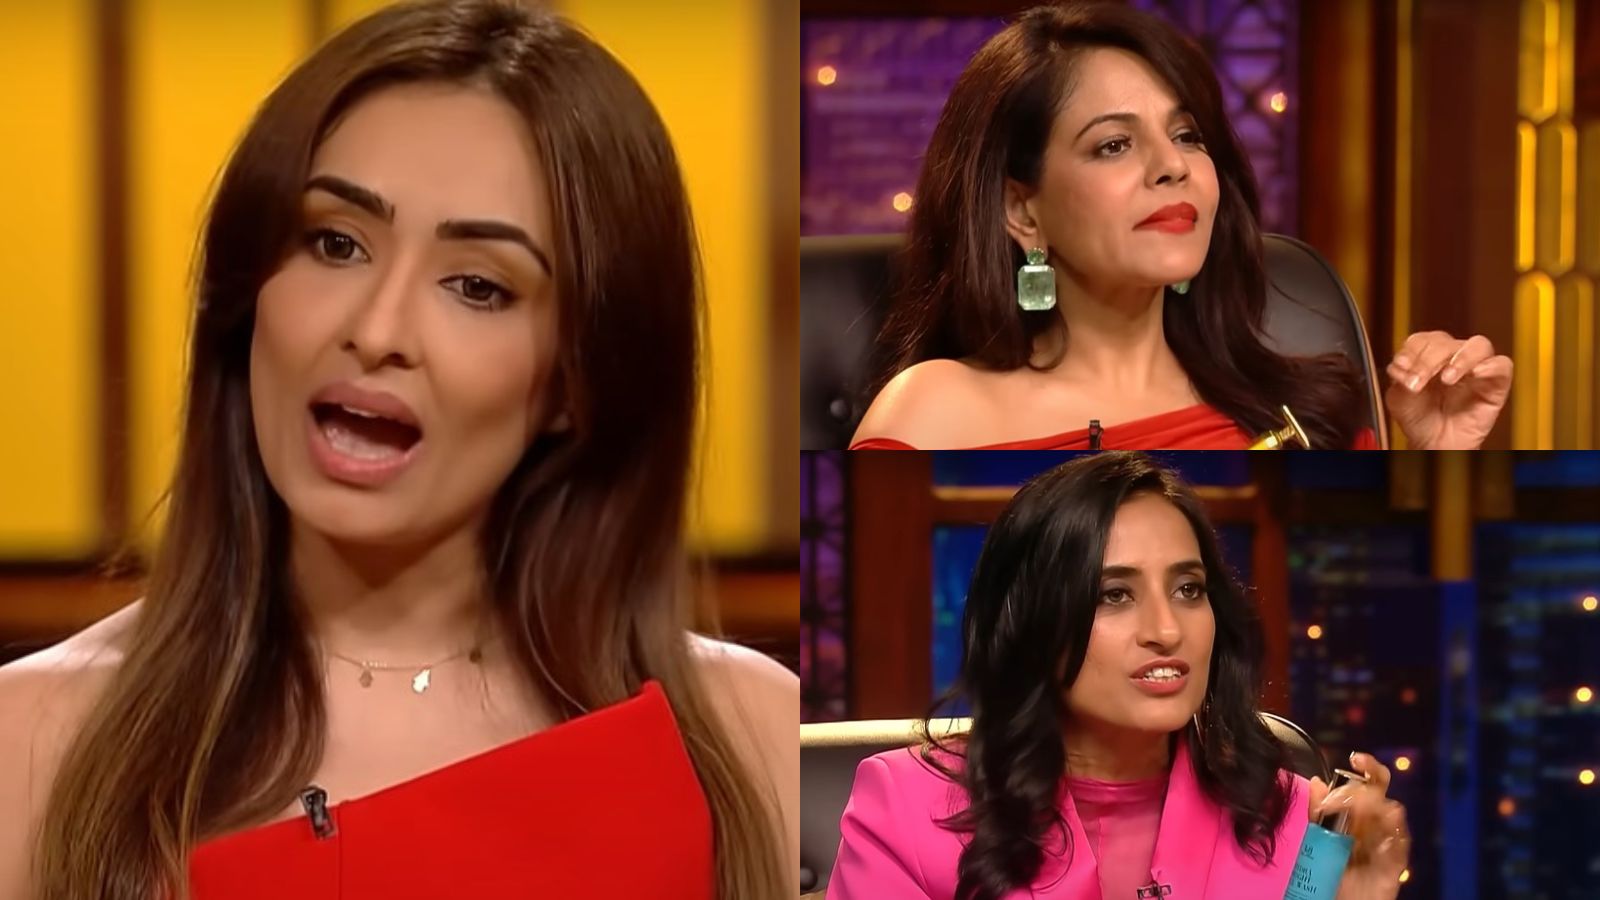 android, shark tank india: house of beauty founder vibhuti arora says she felt attacked by vineeta singh, reveals sales have skyrocketed after rejection